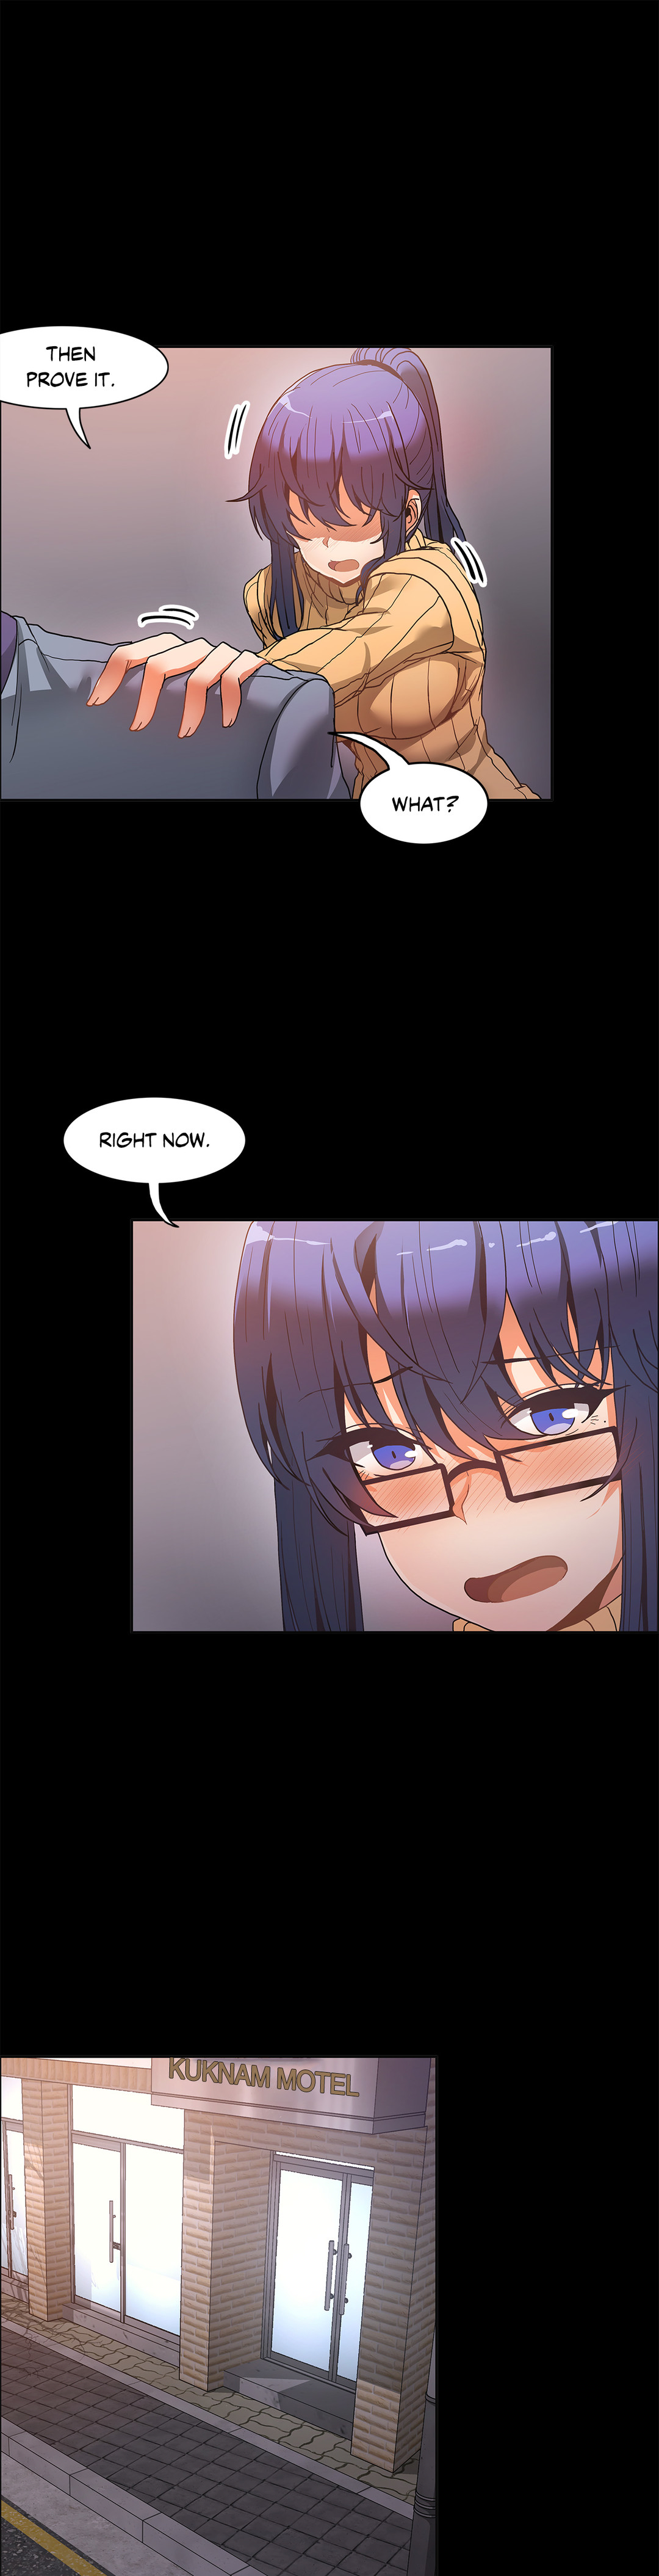 The Girl That Wet the Wall Ch 48 - 50 page 13 full